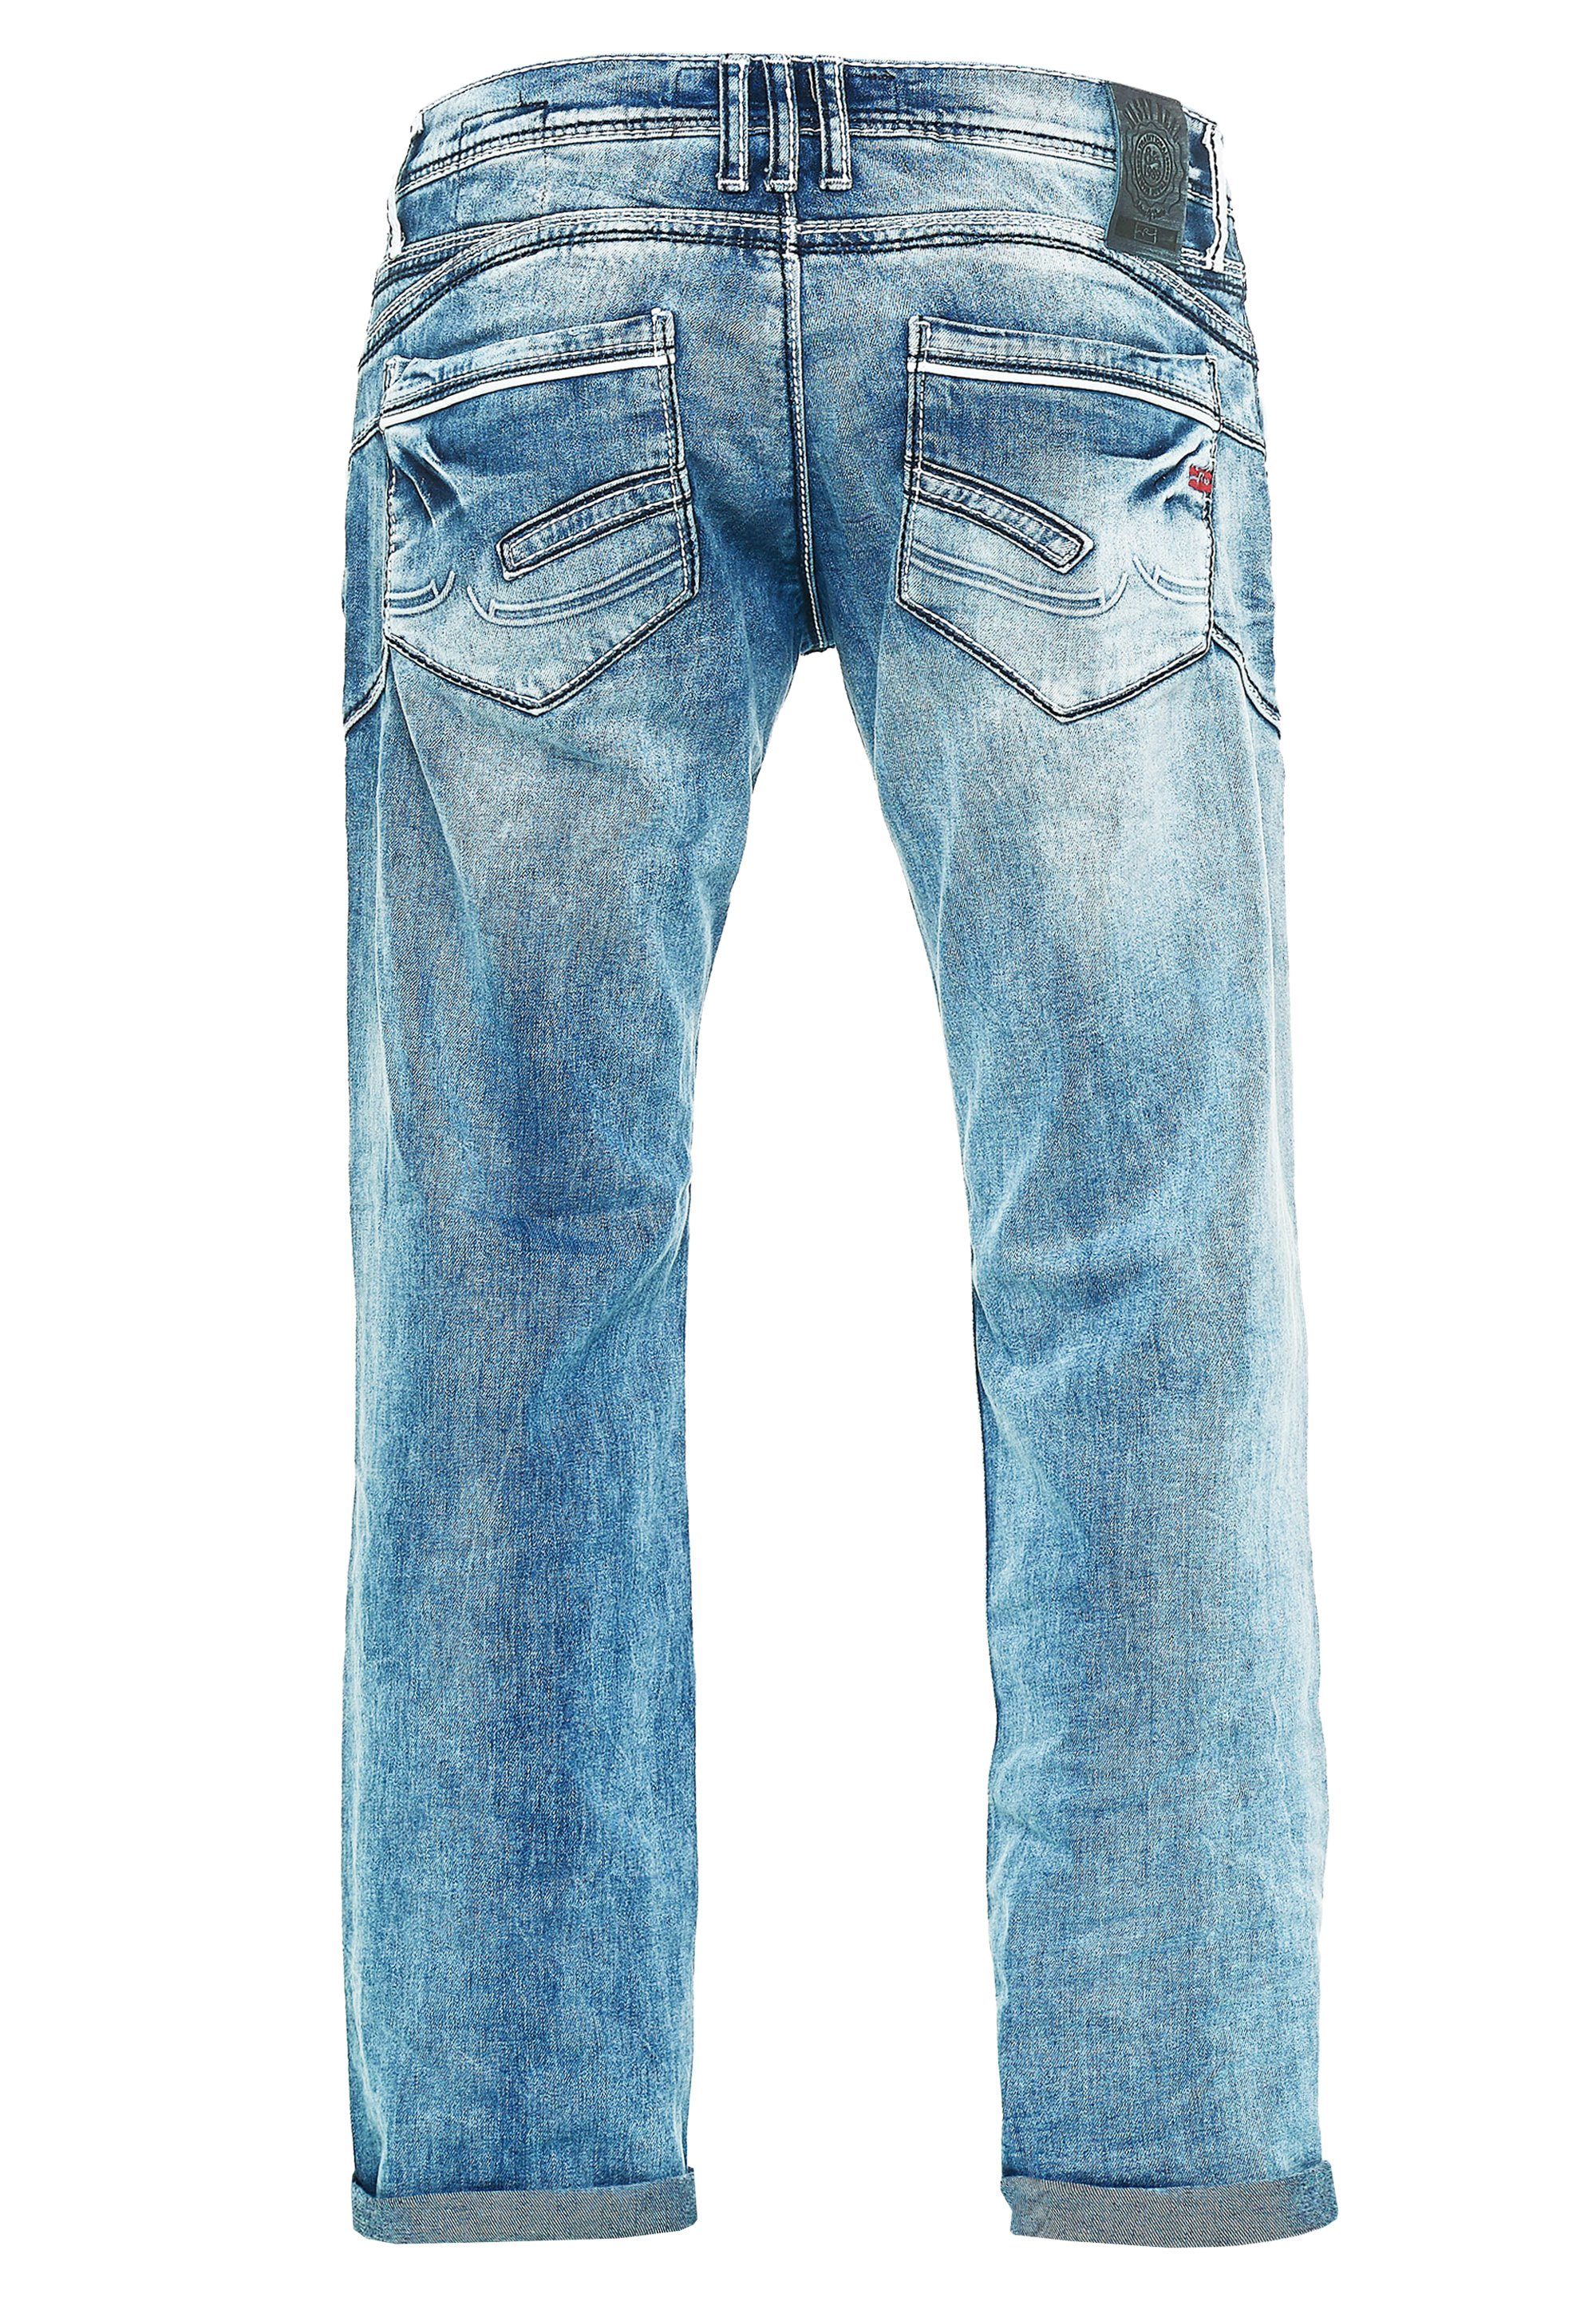 cooler mit Jeans Neal Rusty Waschung Bequeme